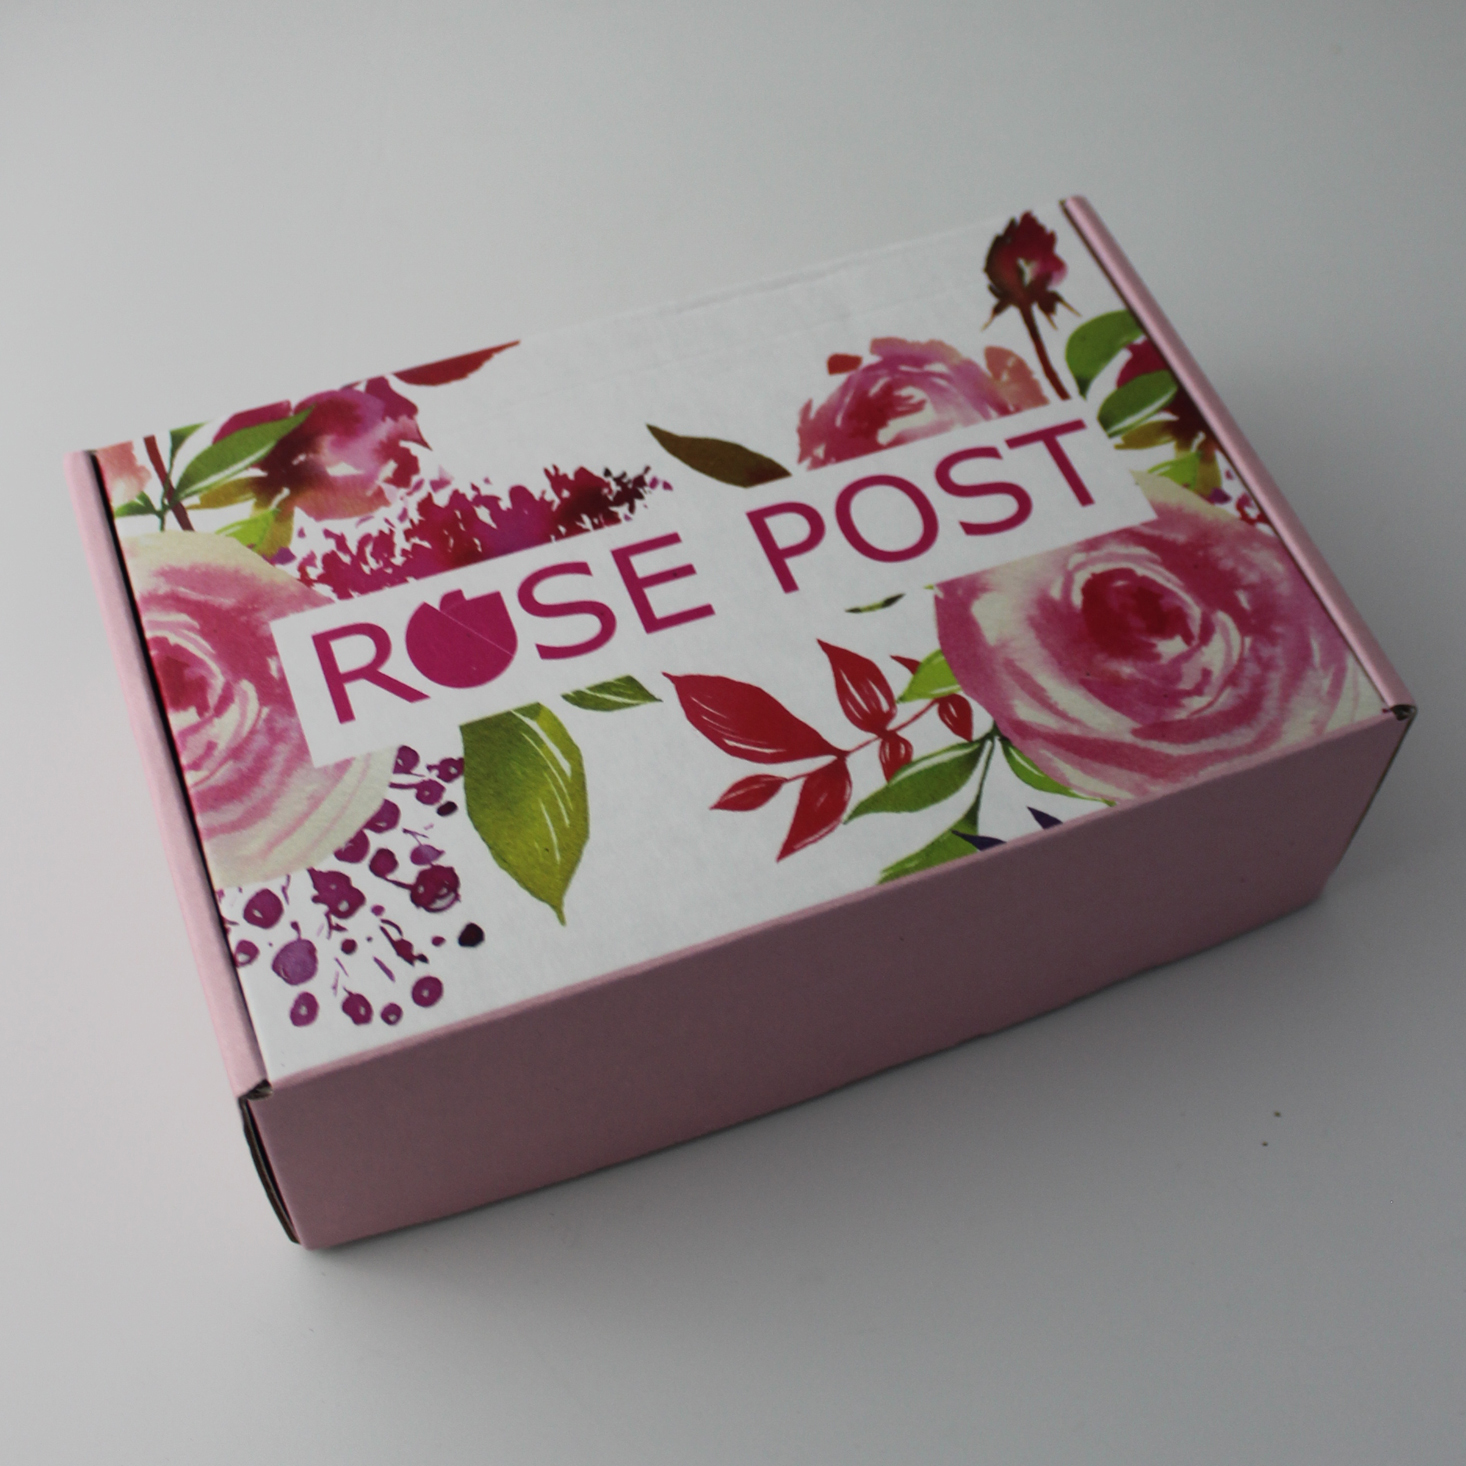 RosePost Box Subscription Review + Coupon – Winter 2019